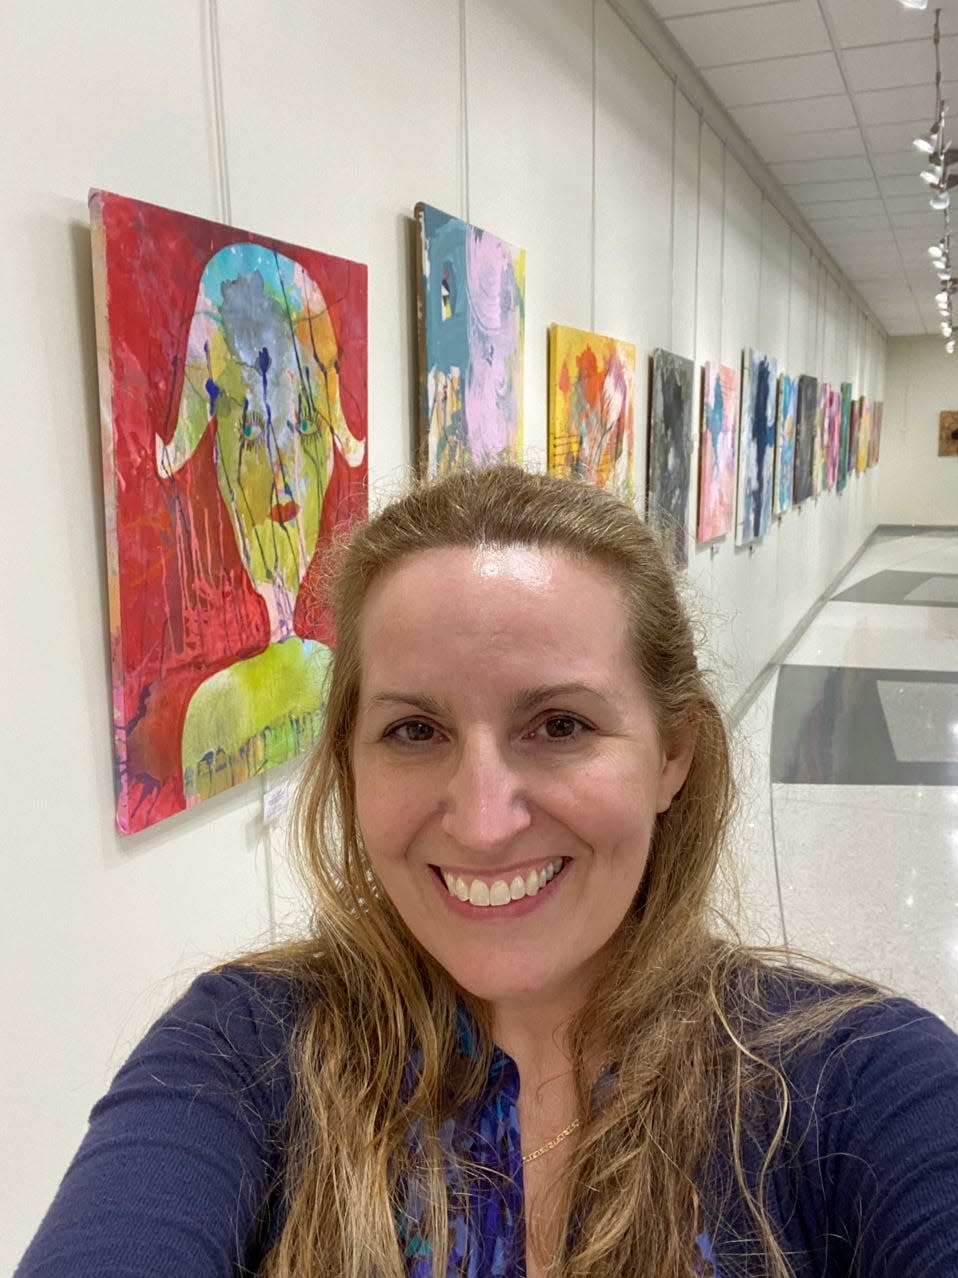 Sara Miller’s “Looking on the Bright Side” exhibition at the Artport Gallery showcases 30 of her experimental, original paintings. These pieces are on display now through Aug. 22.